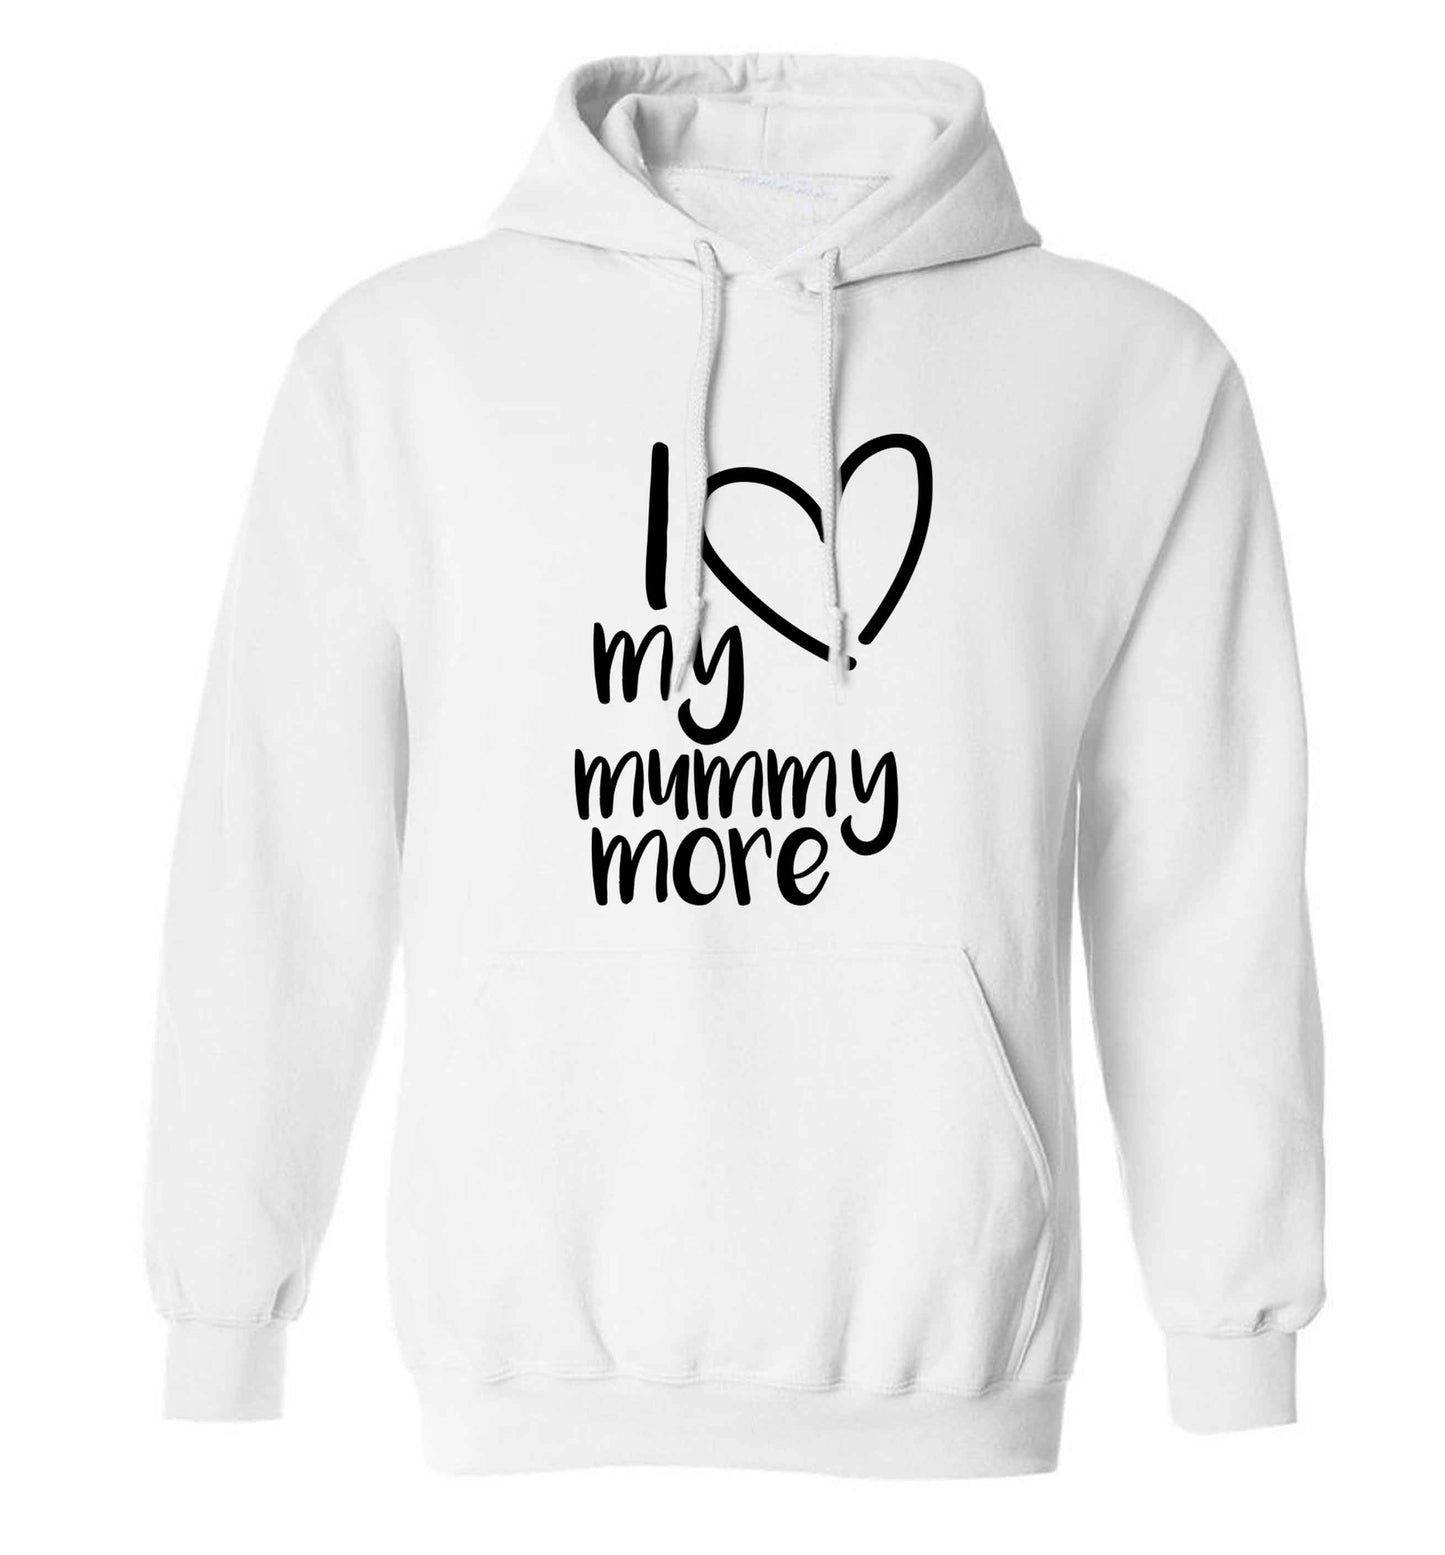 I love my mummy more adults unisex white hoodie 2XL